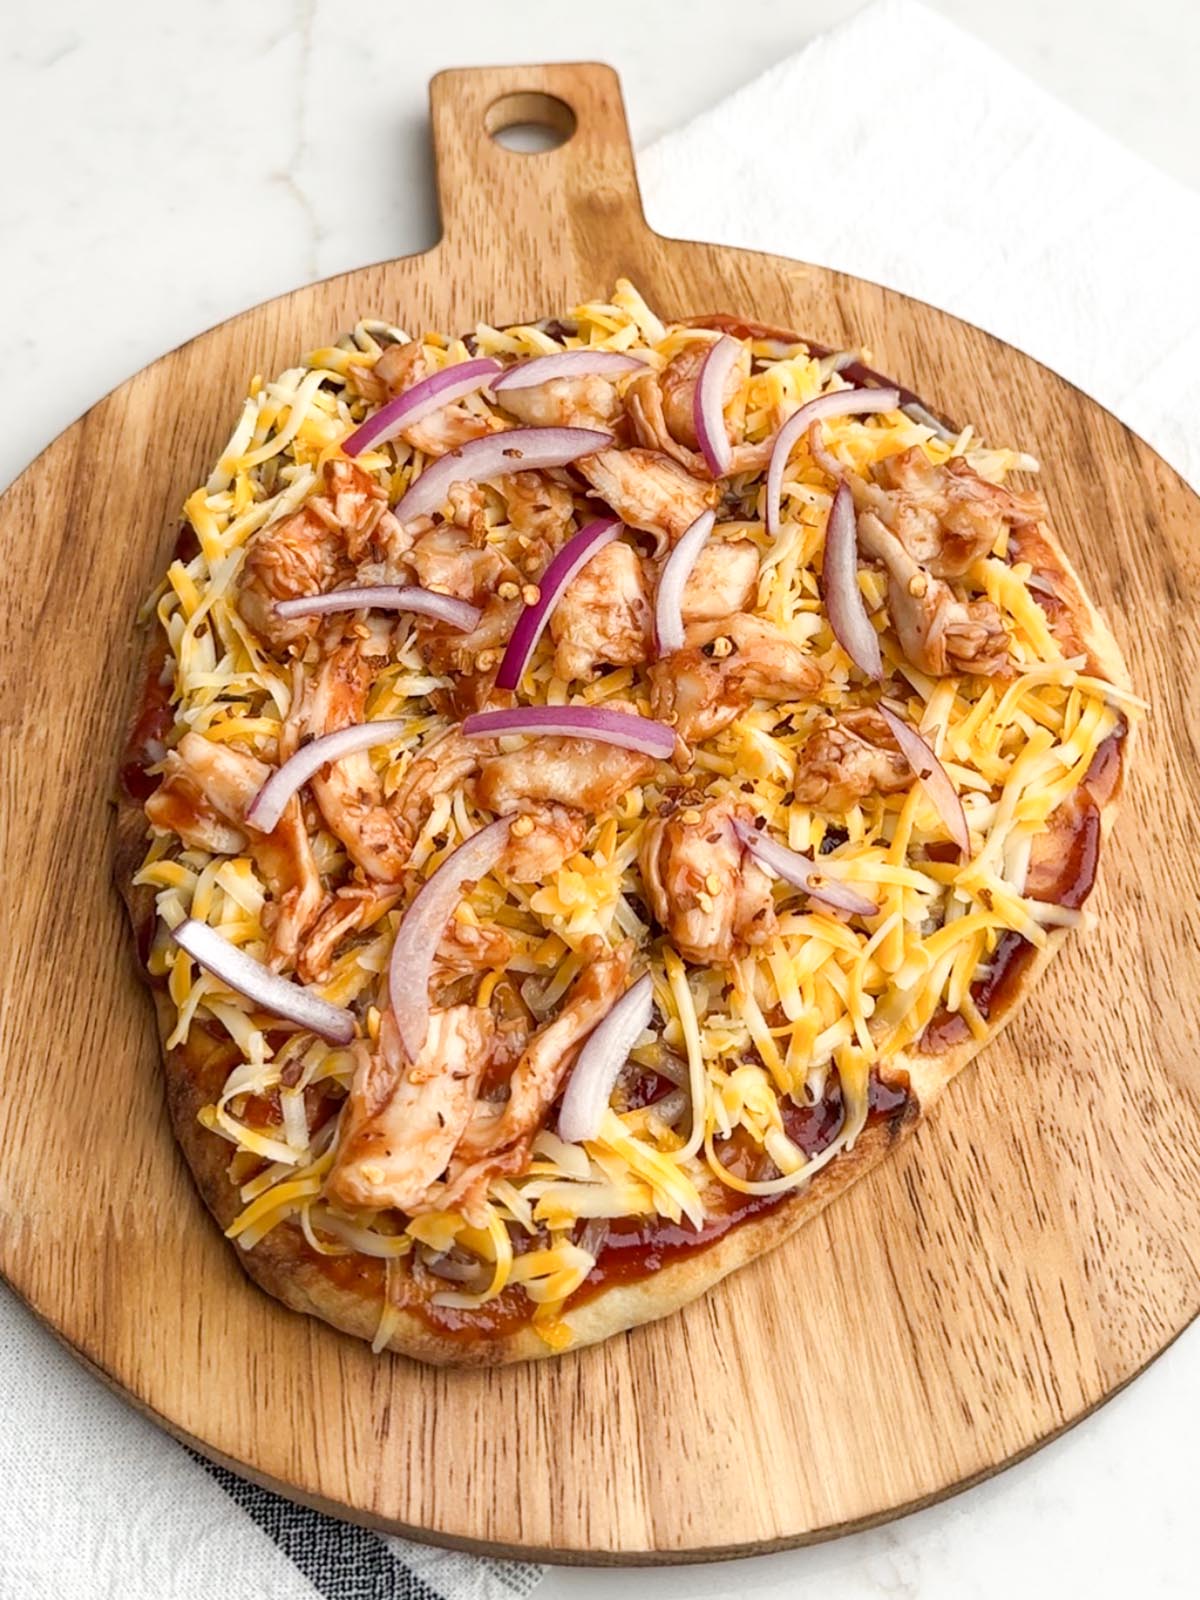 unbaked bbq chicken flatbread on a wooden cutting board